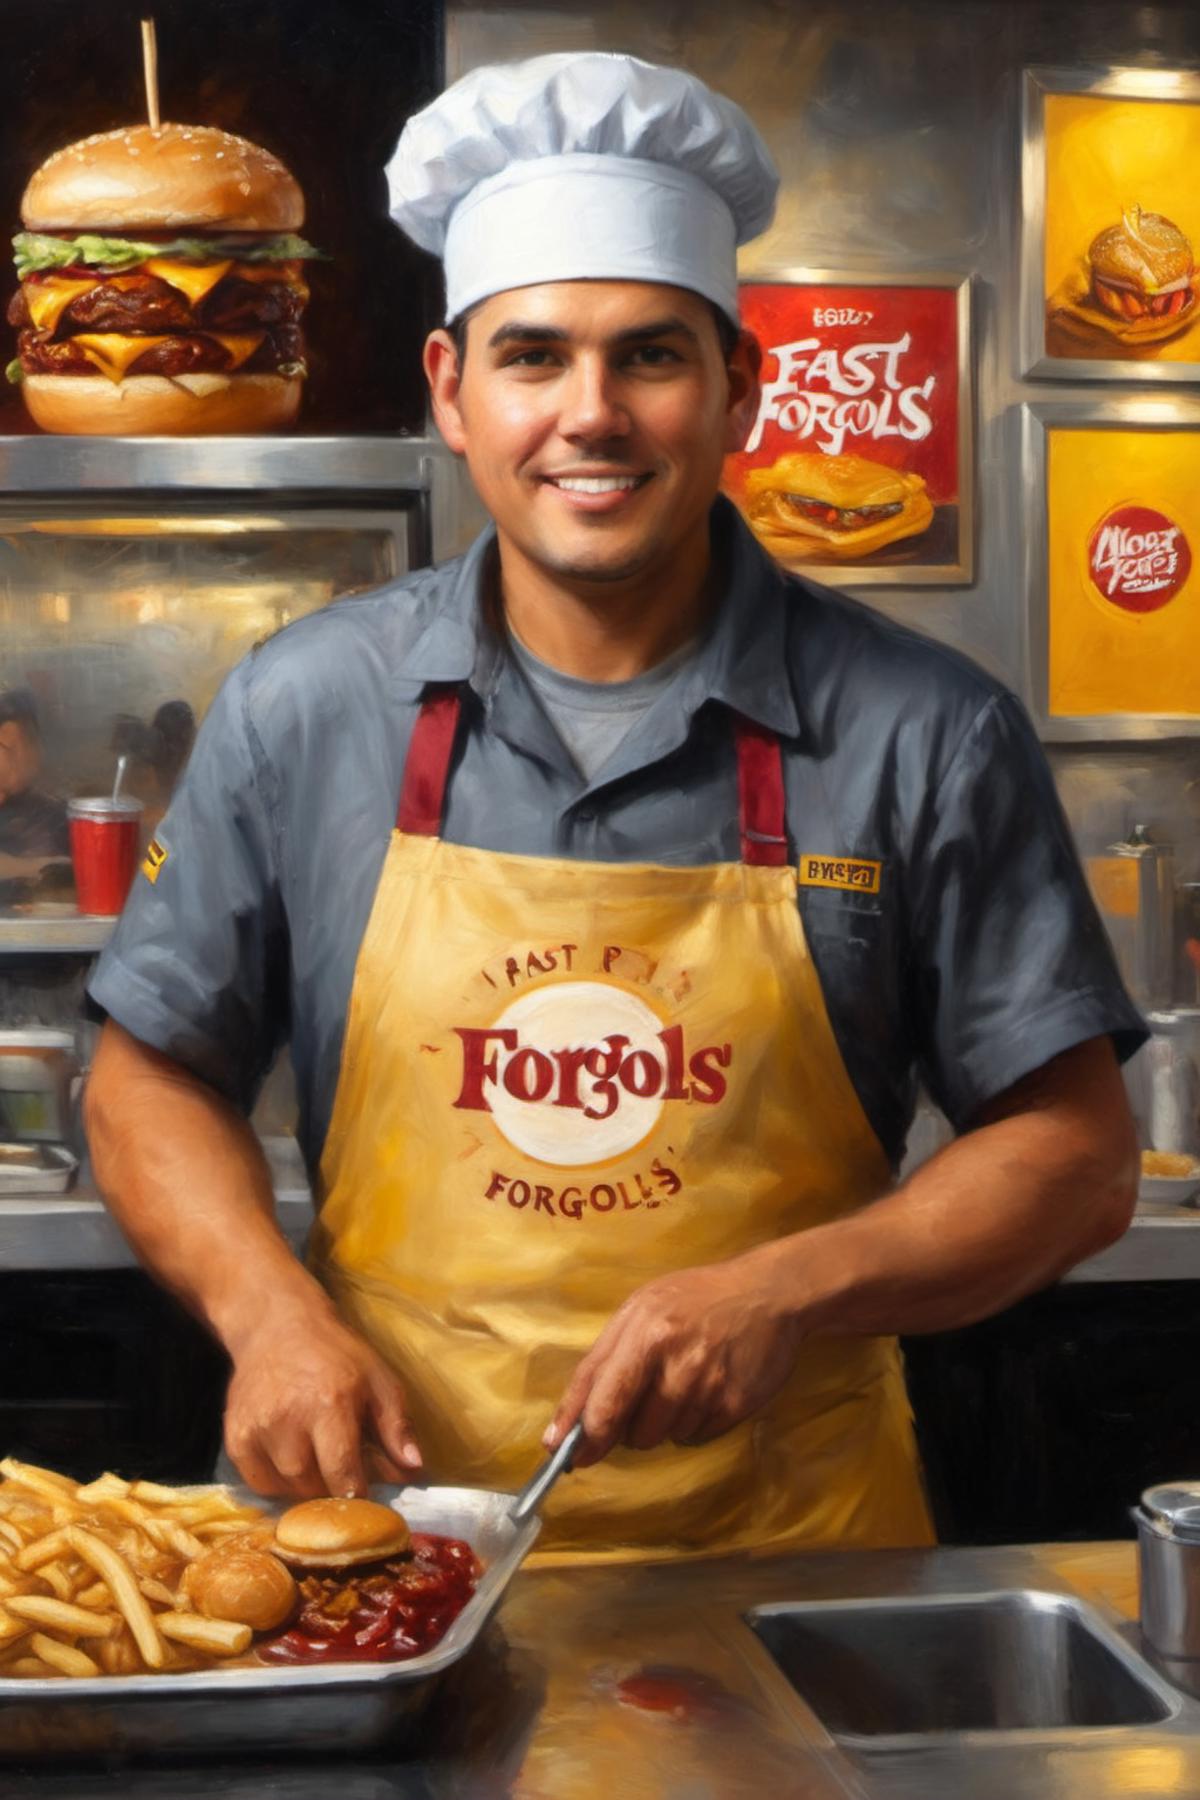 a masterful painting of a fast food restaurant employee wearing an apron and visor, gold grey maroon and black theme color...